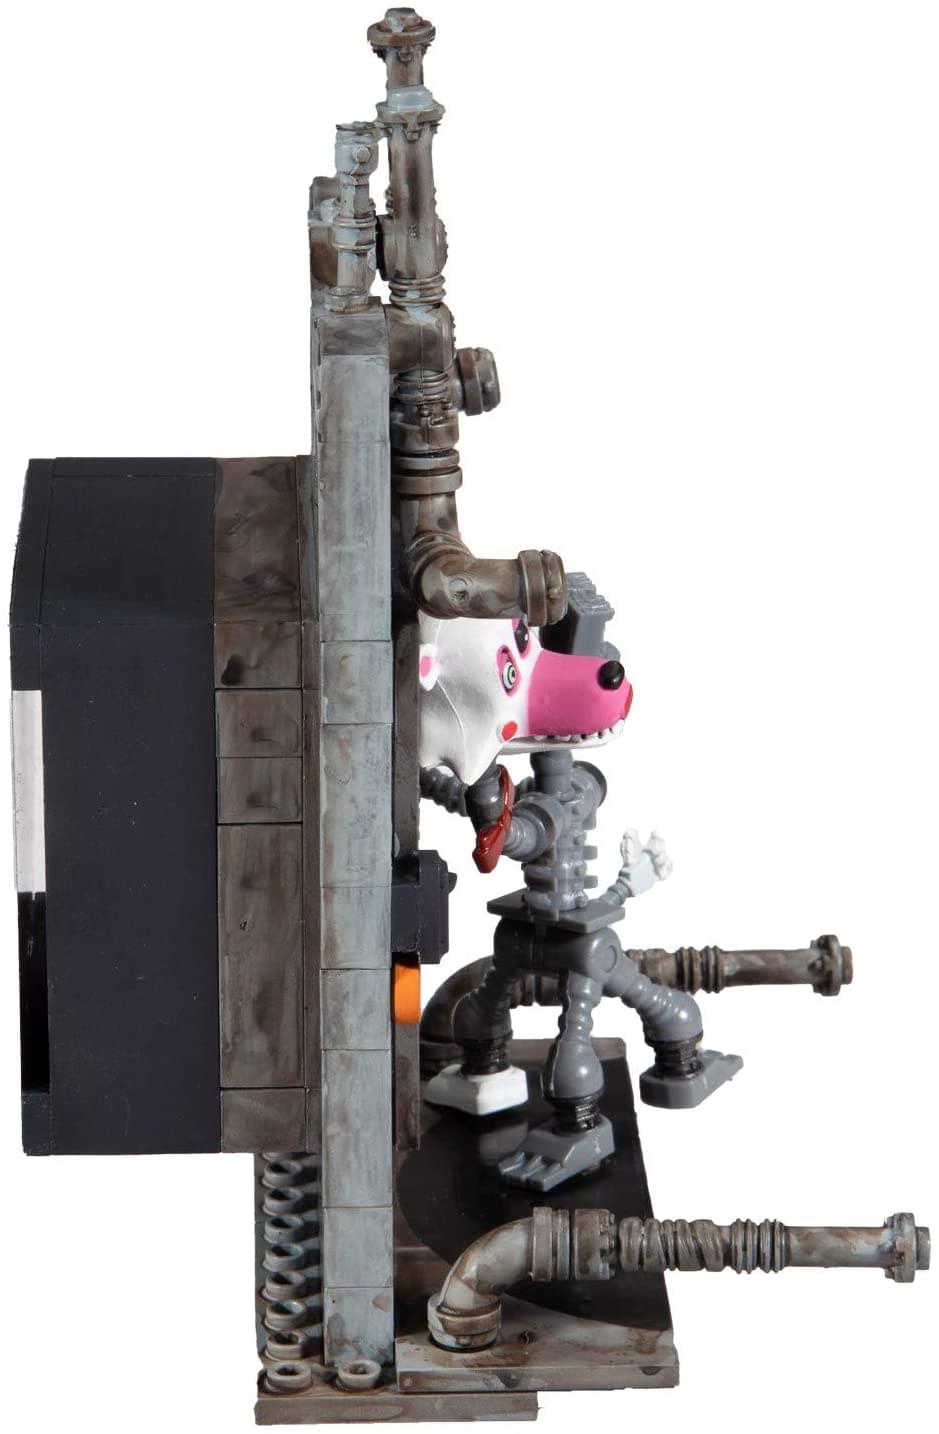 Five Nights at Freddy's Small Construction Set | Vent Repair